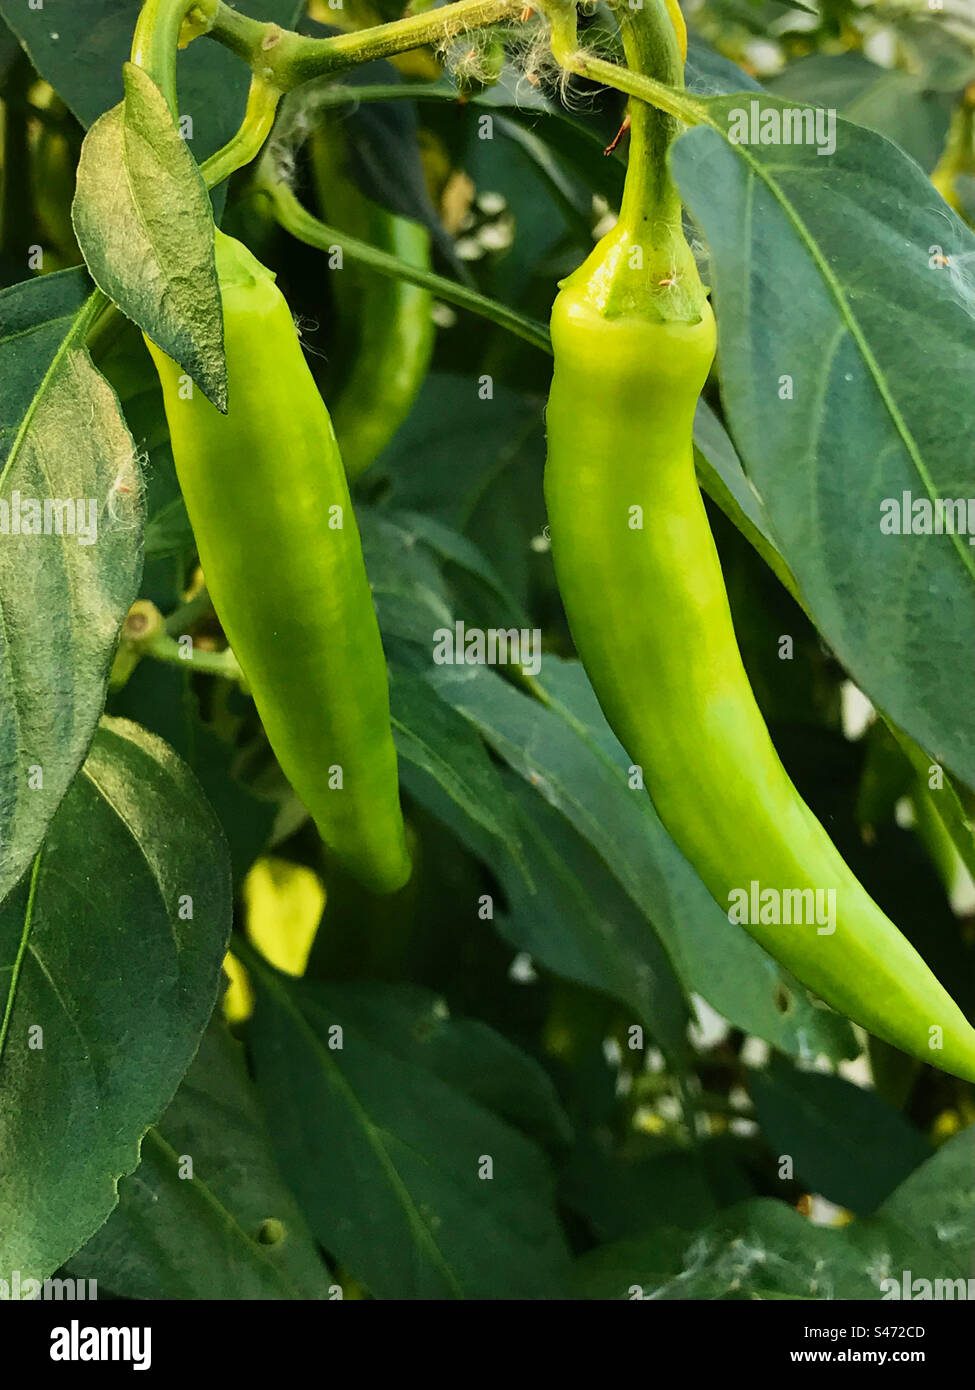 Chilli peppers growing. Capsicum frutescens Stock Photo